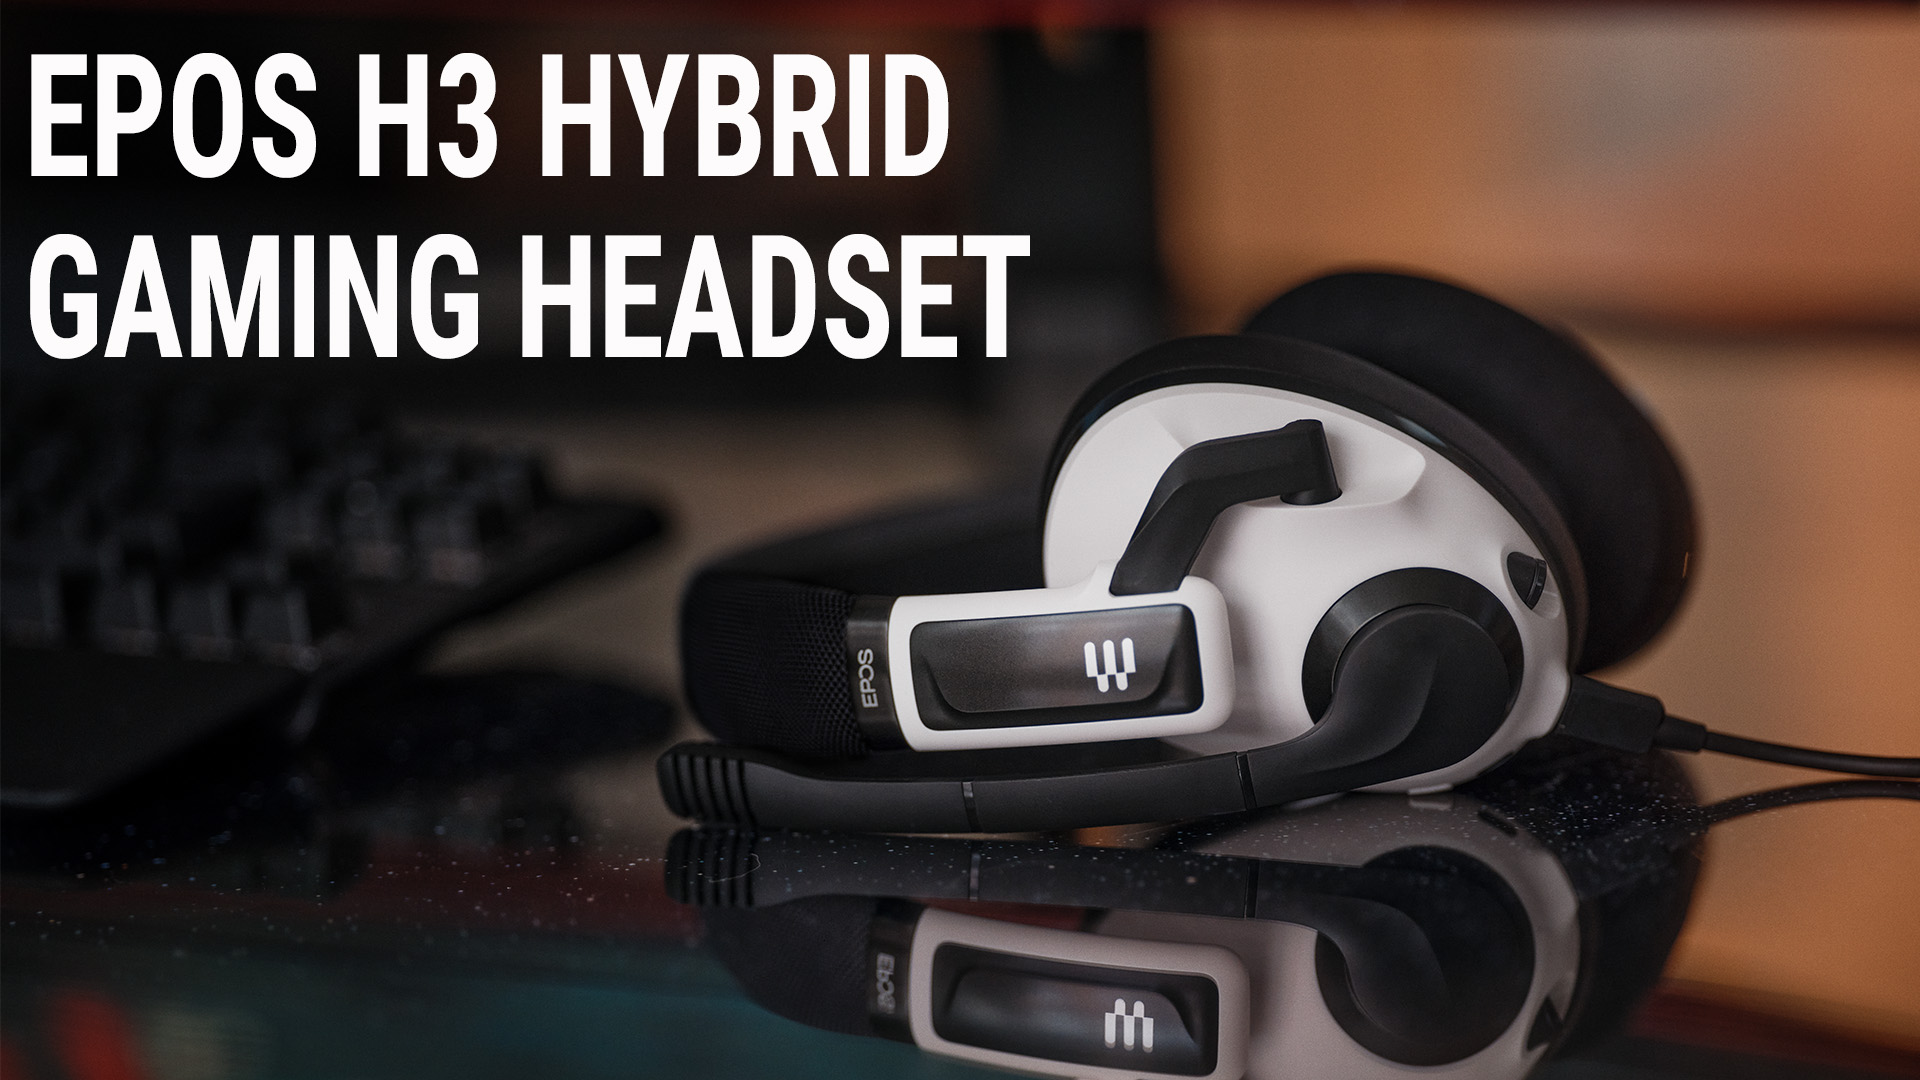 High-End H3 Hybrid Gaming Headset On Sale In Time For Back-To-School Season